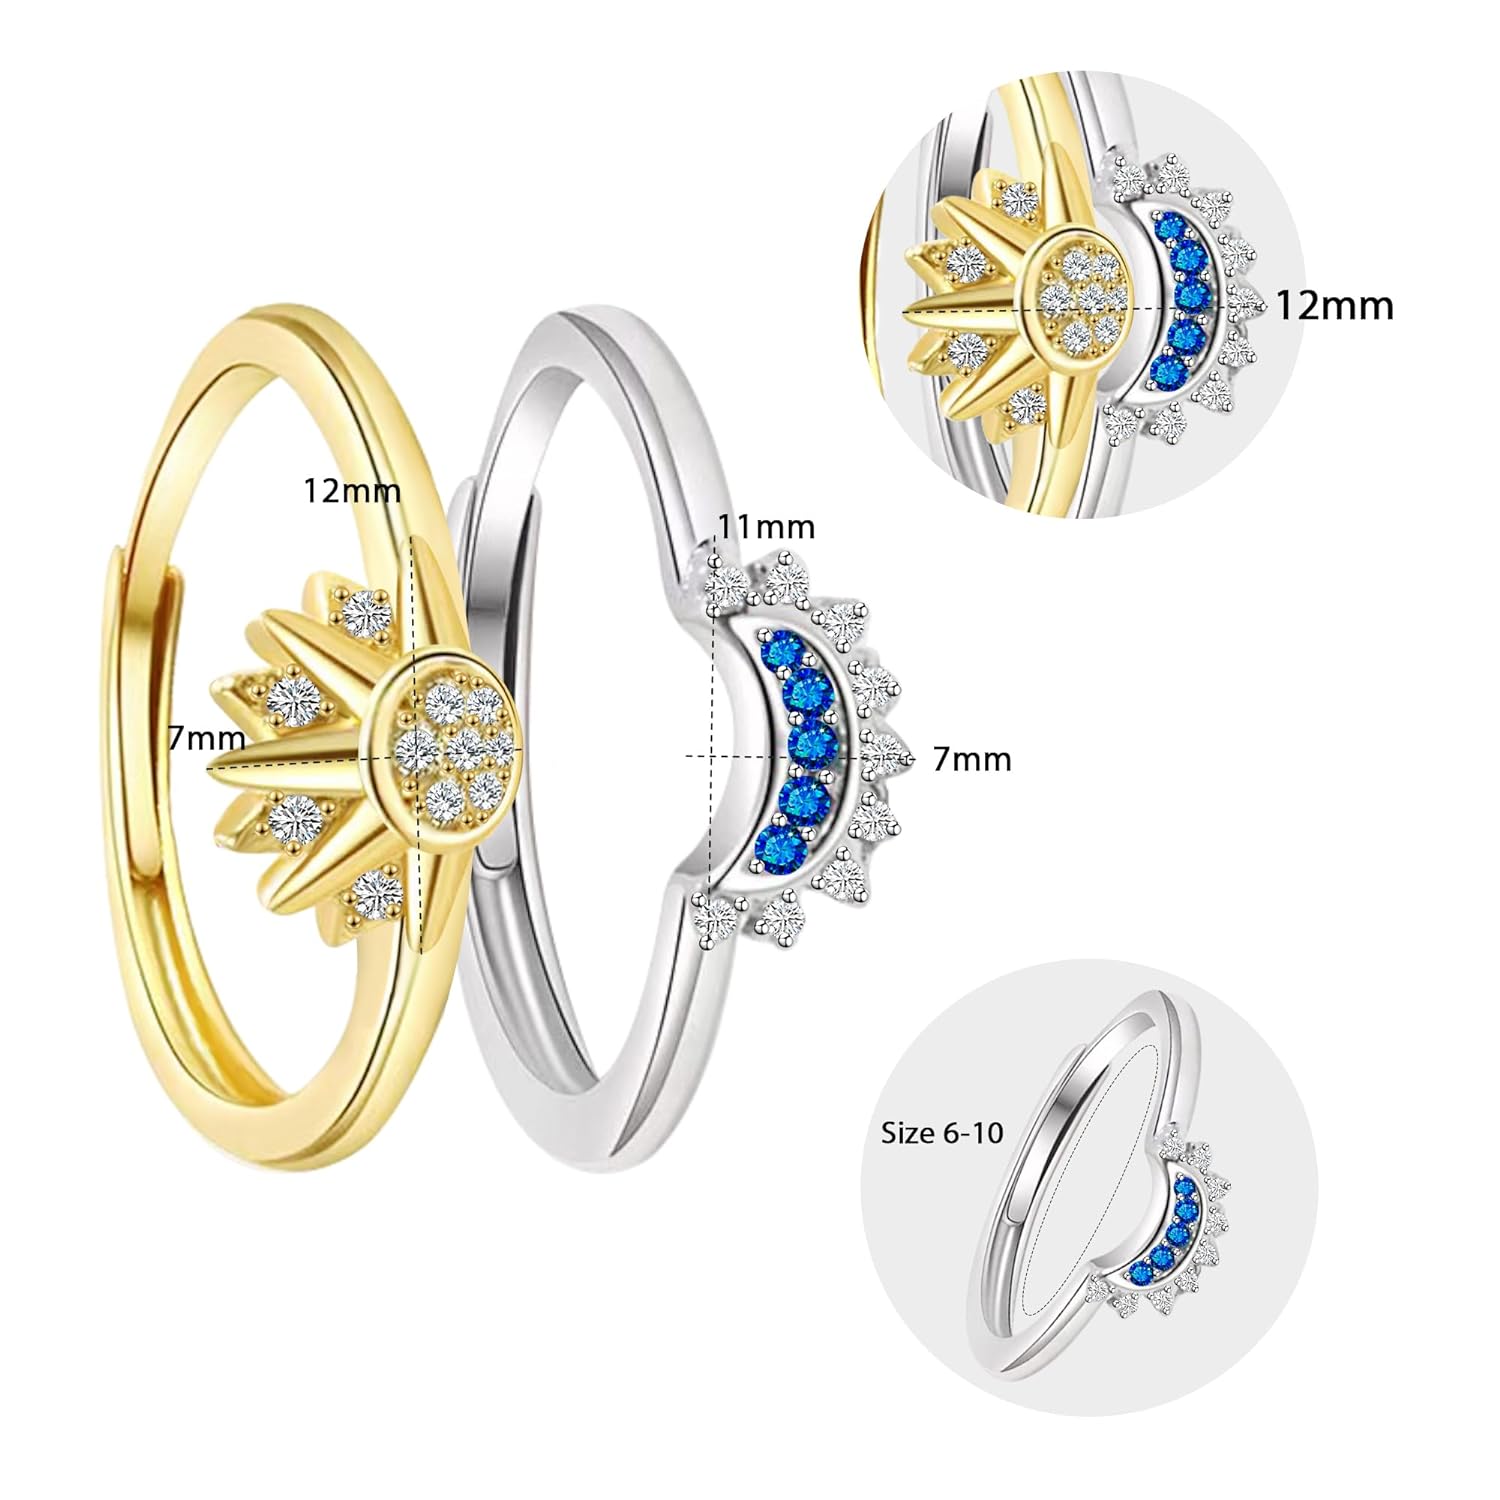 Sun and Moon Ring set stackable rings for women,adjustable celestial jewelry anillos para mujer matching rings as friendship rings for best friend gifts,sun moon stacking rings for teen girls